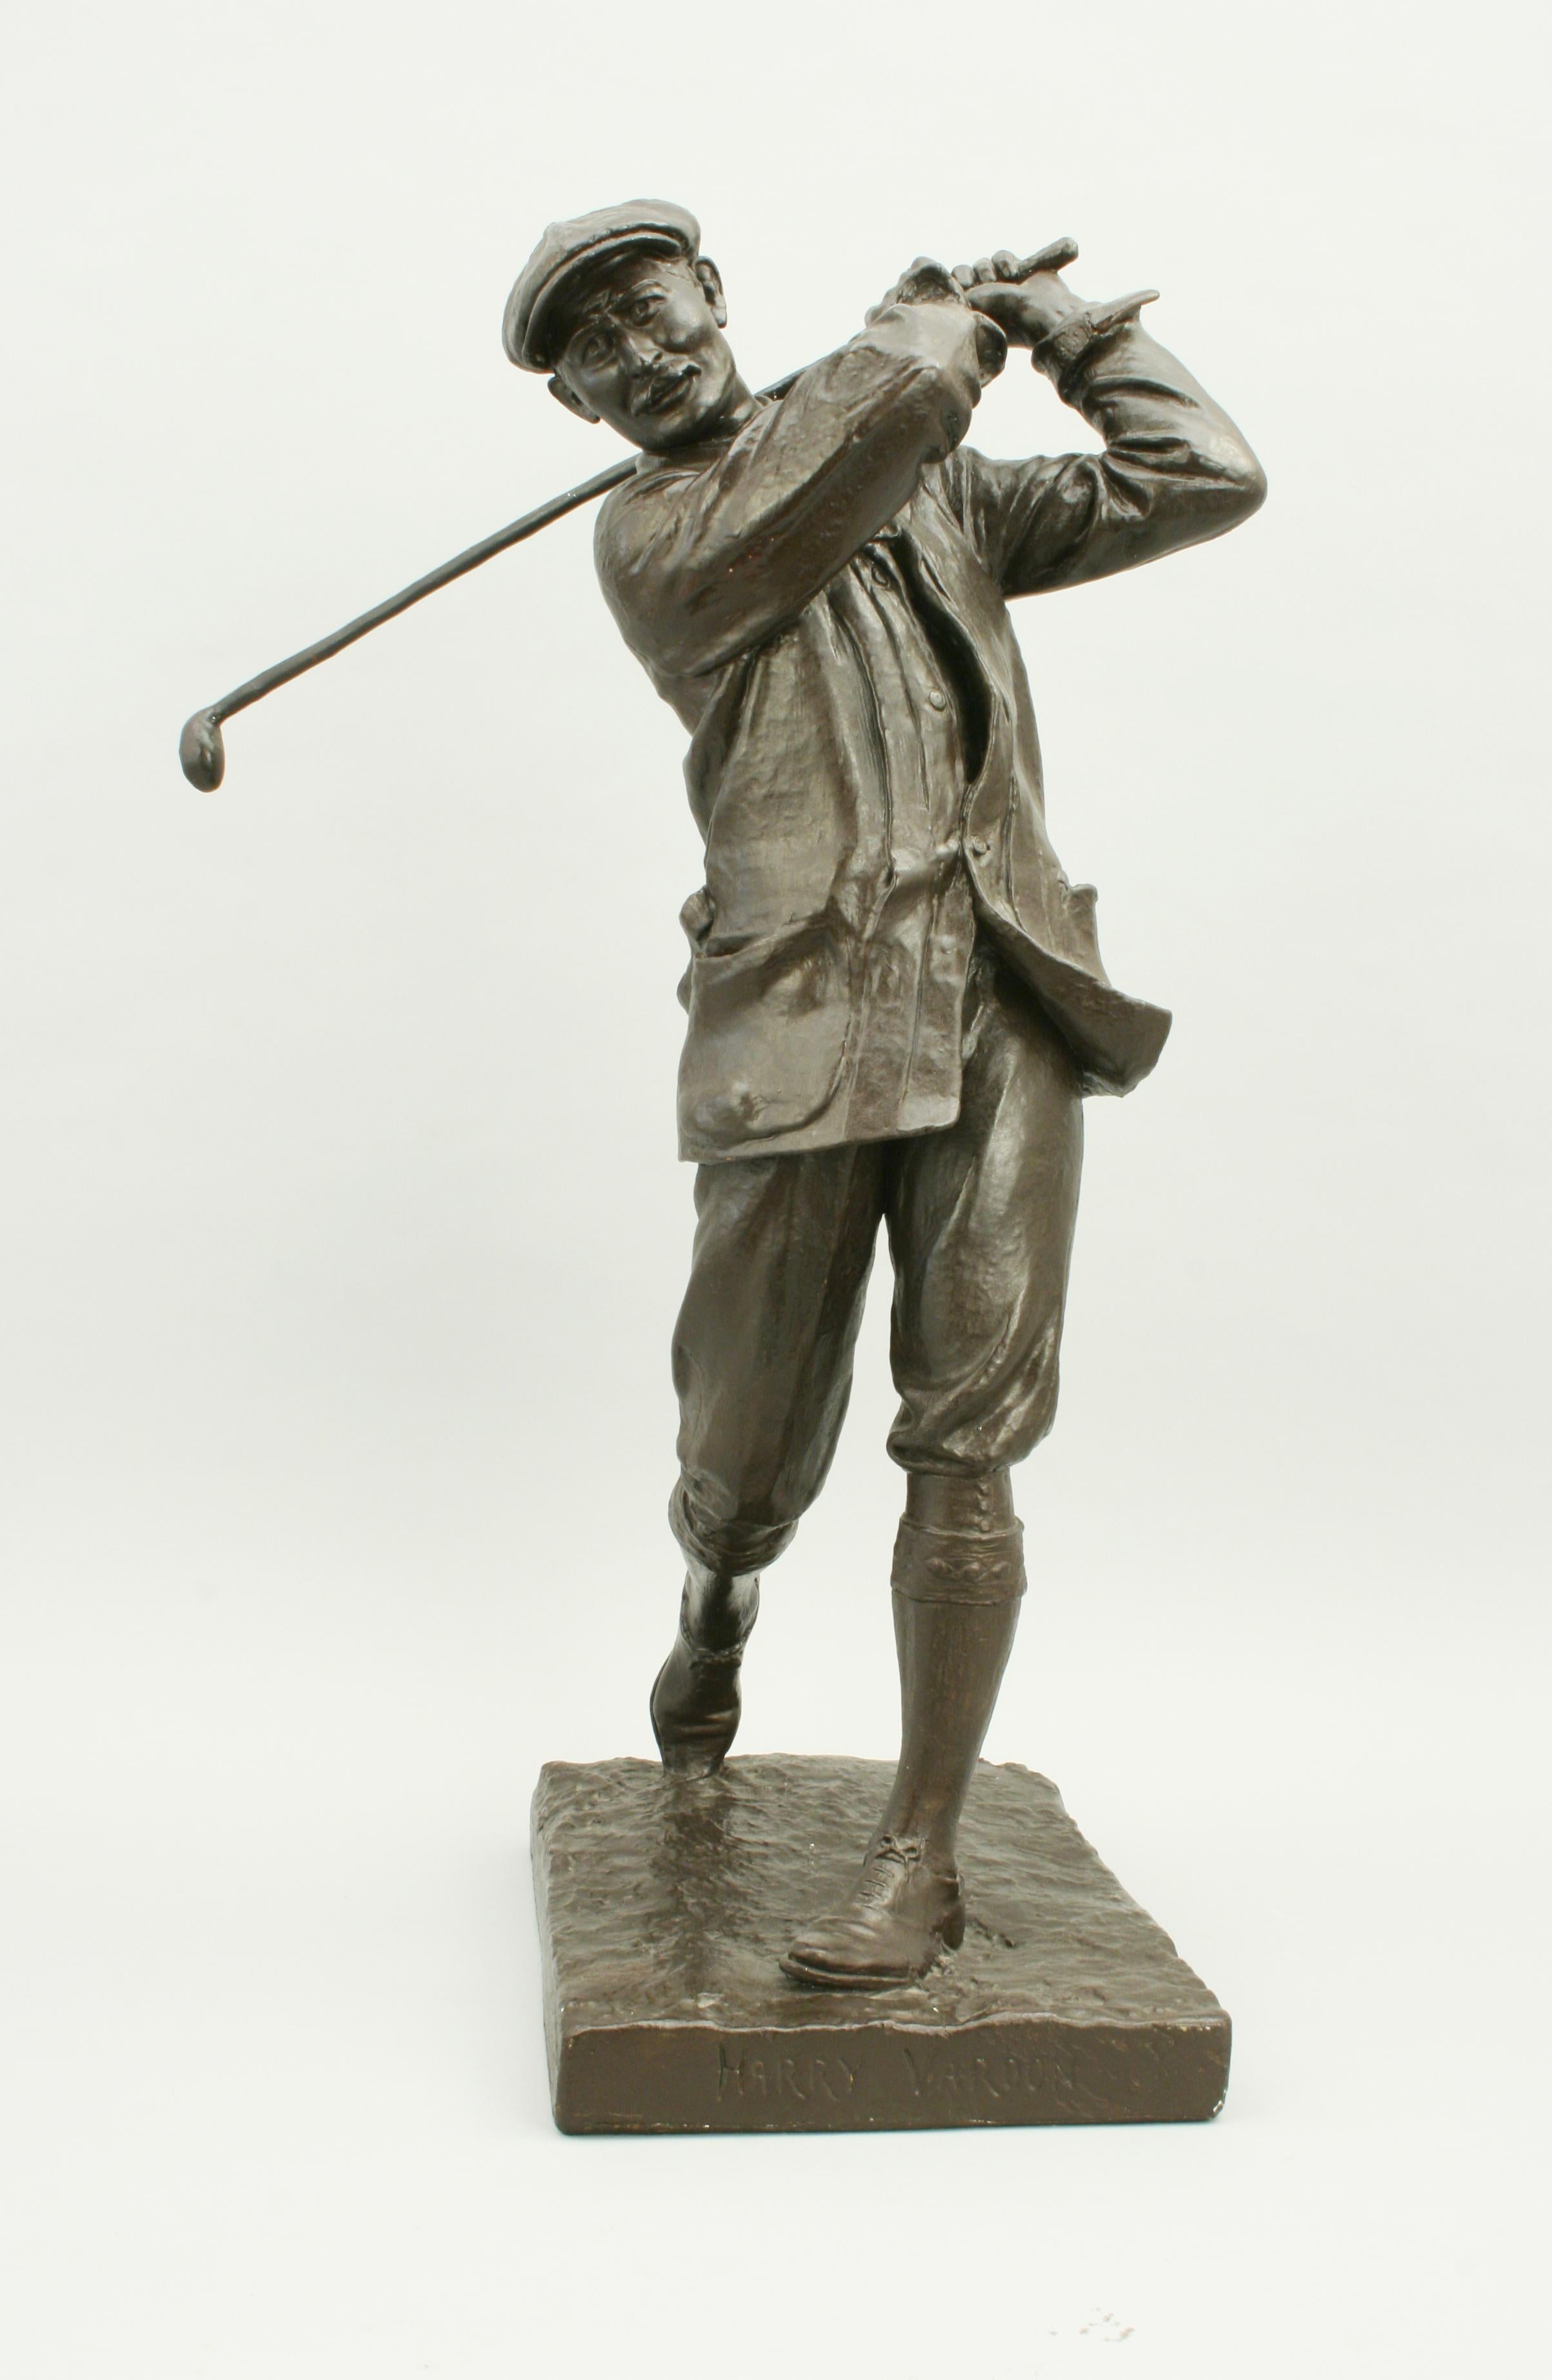 Vintage golfing figure of Harry Vardon.
A wonderfully sculpted figure of the Champion Golfer Harry Vardon by Hal Ludlow. This statue is made of plaster and has been given a painted finish to look like bronze. The base is marked with 'Harry Vardon'